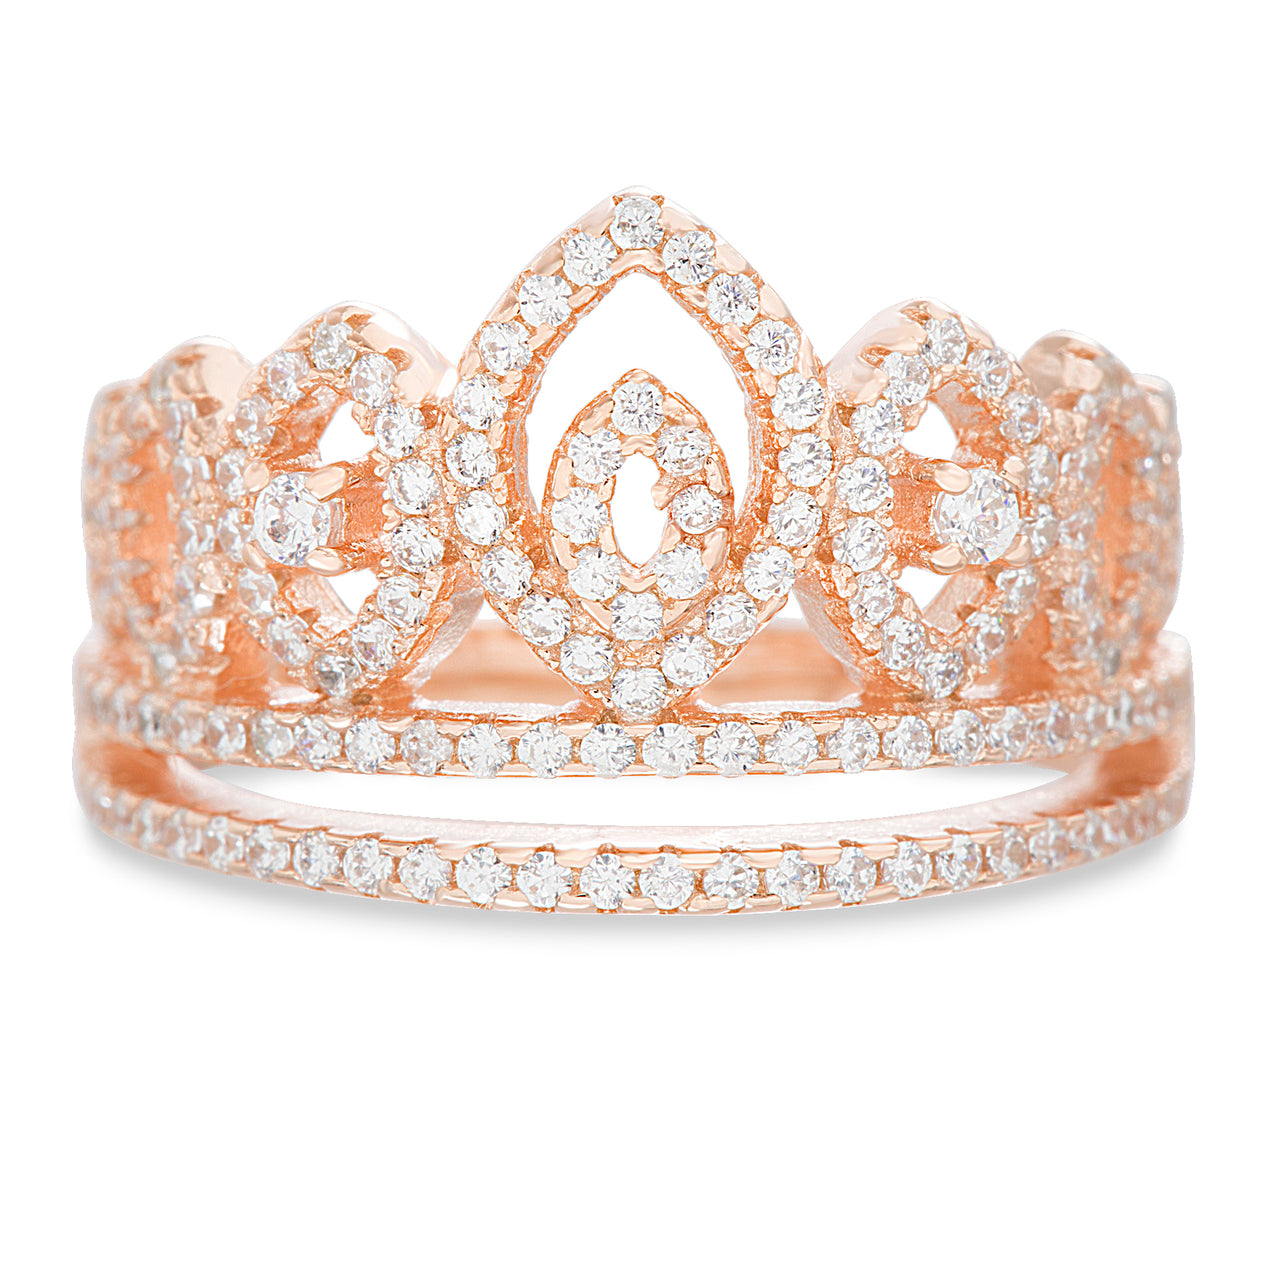 Lesa-Michele-Rose-Gold-Plated-Sterling-Silver-Crown-Design-Ring